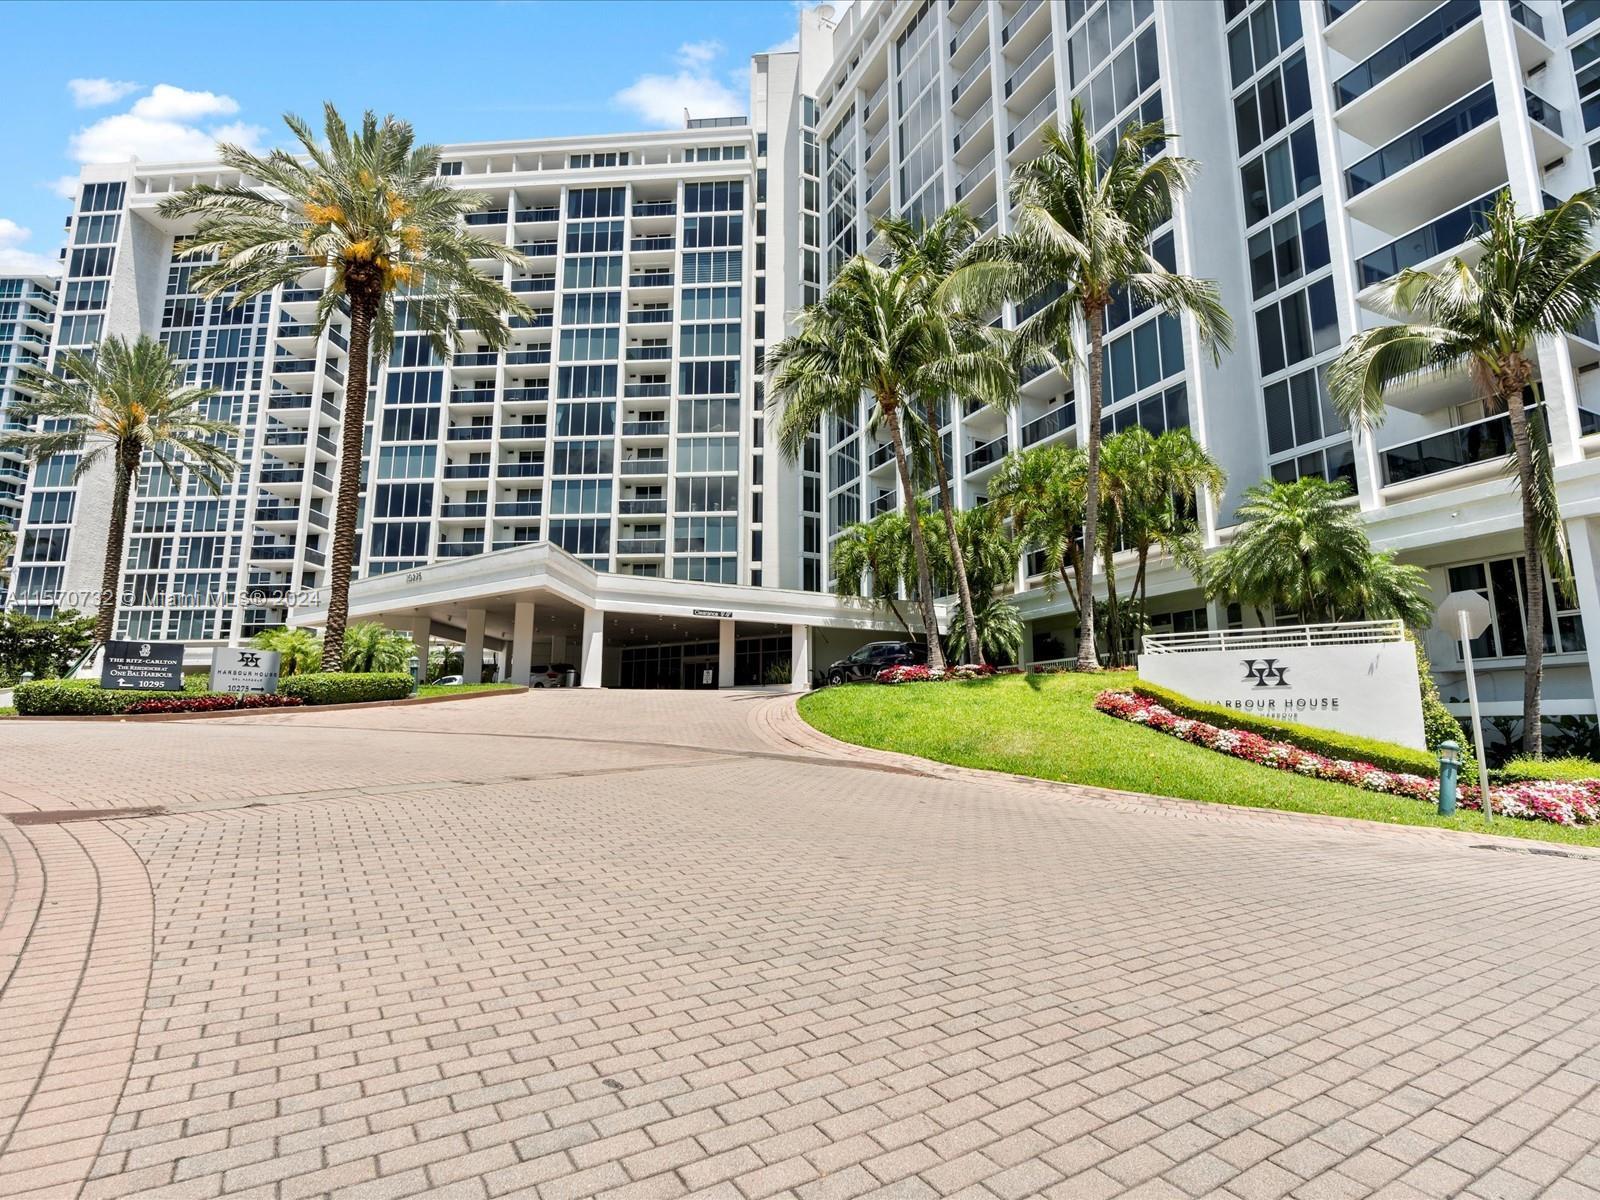 Photo of 10275 Collins Ave #315 in Bal Harbour, FL